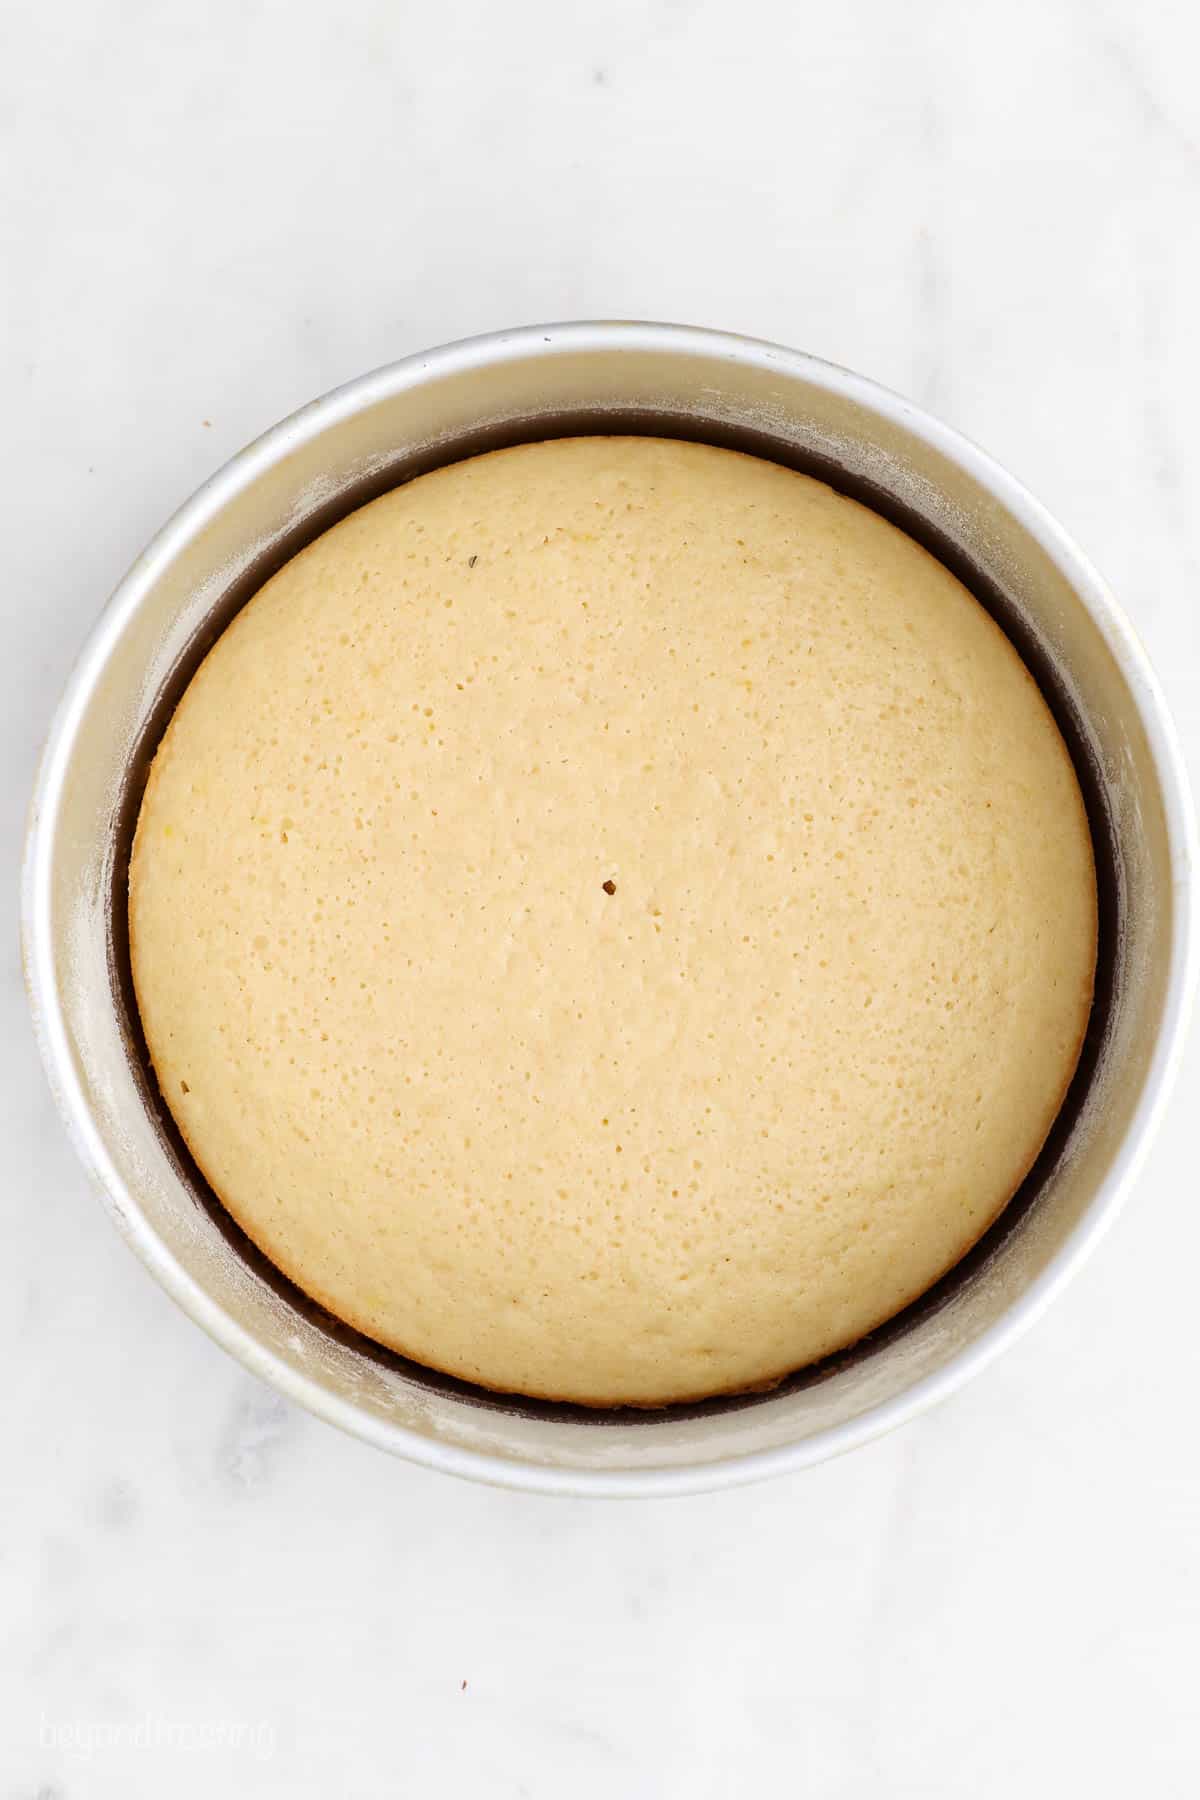 Birds eye view of a vanilla cake layer in a round pan